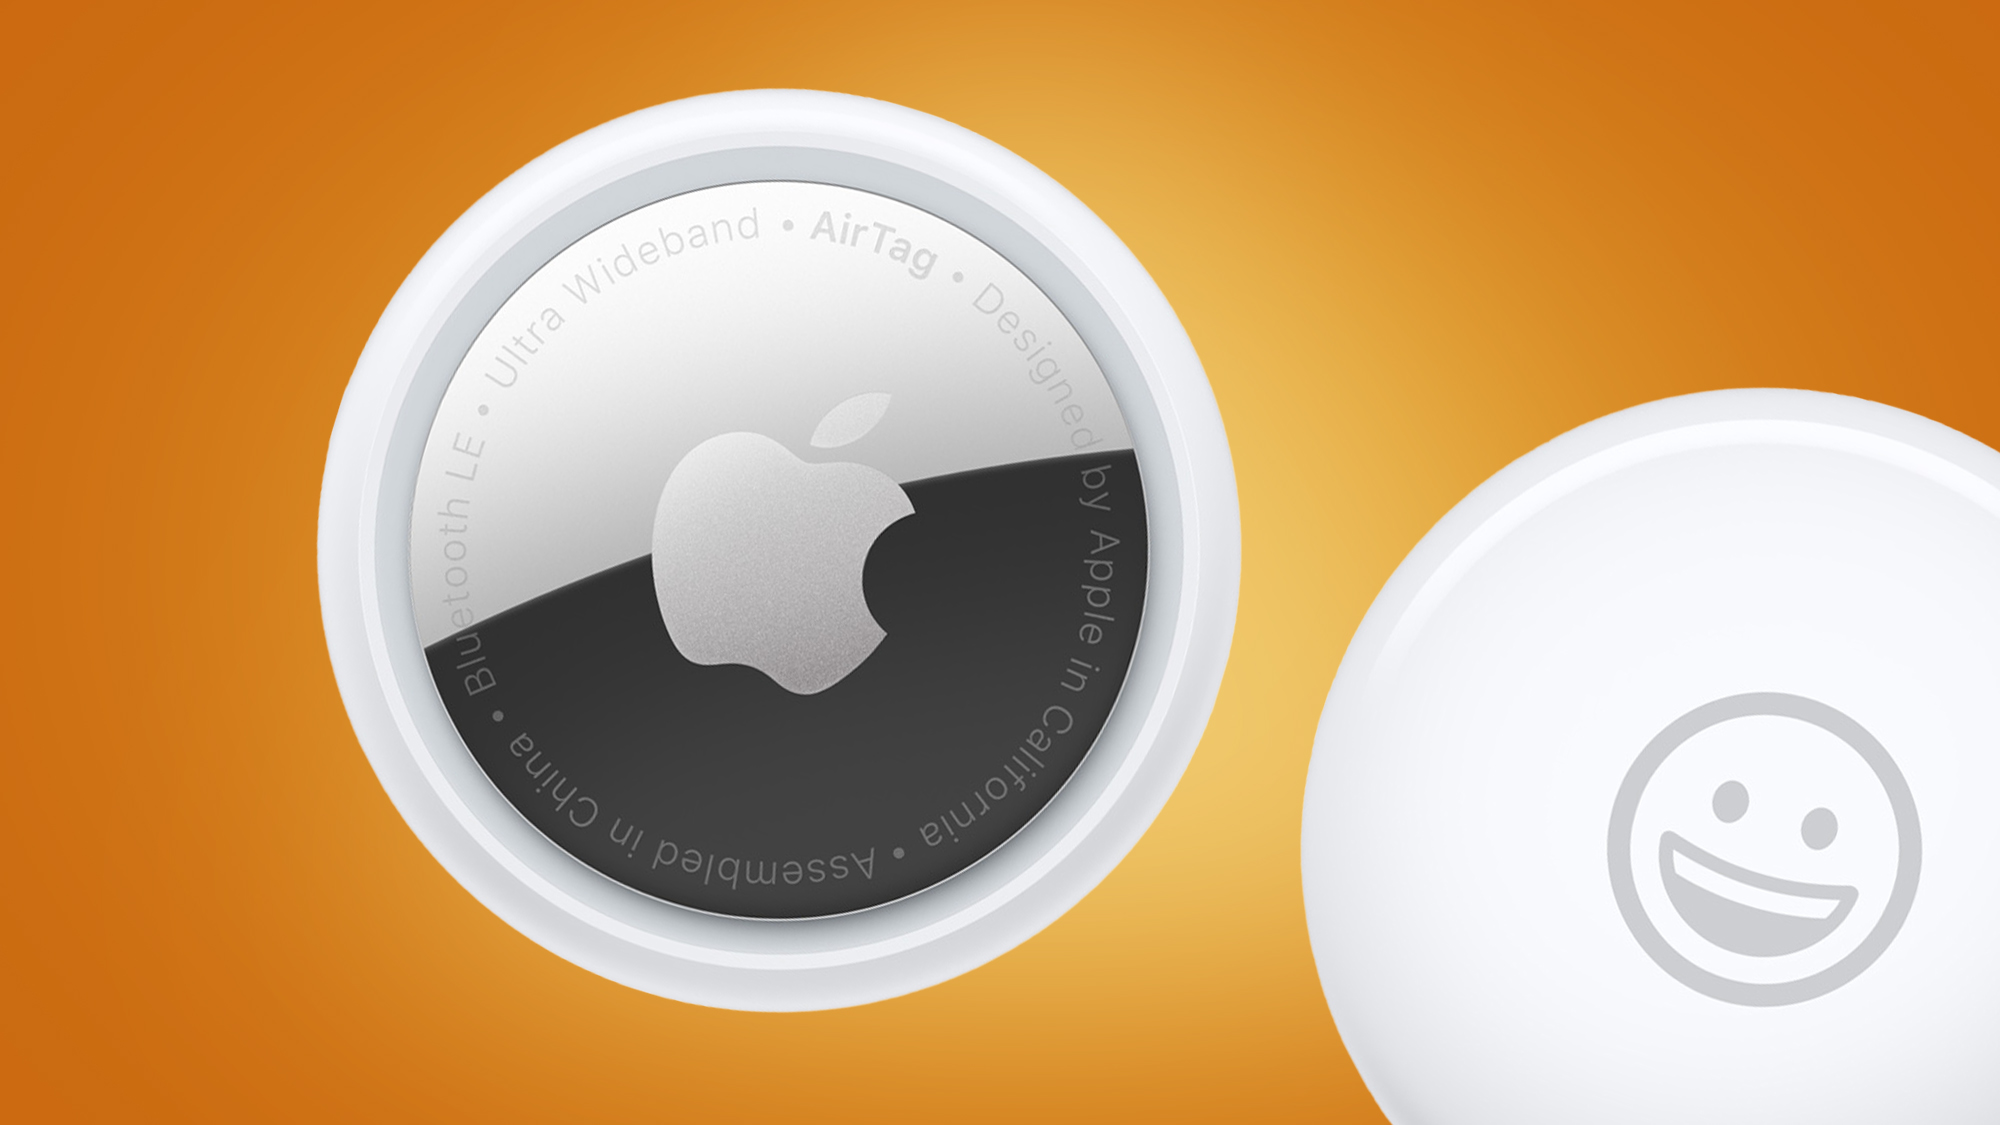 How do Apple's AirTags work? Bluetooth and Ultra Wideband explained